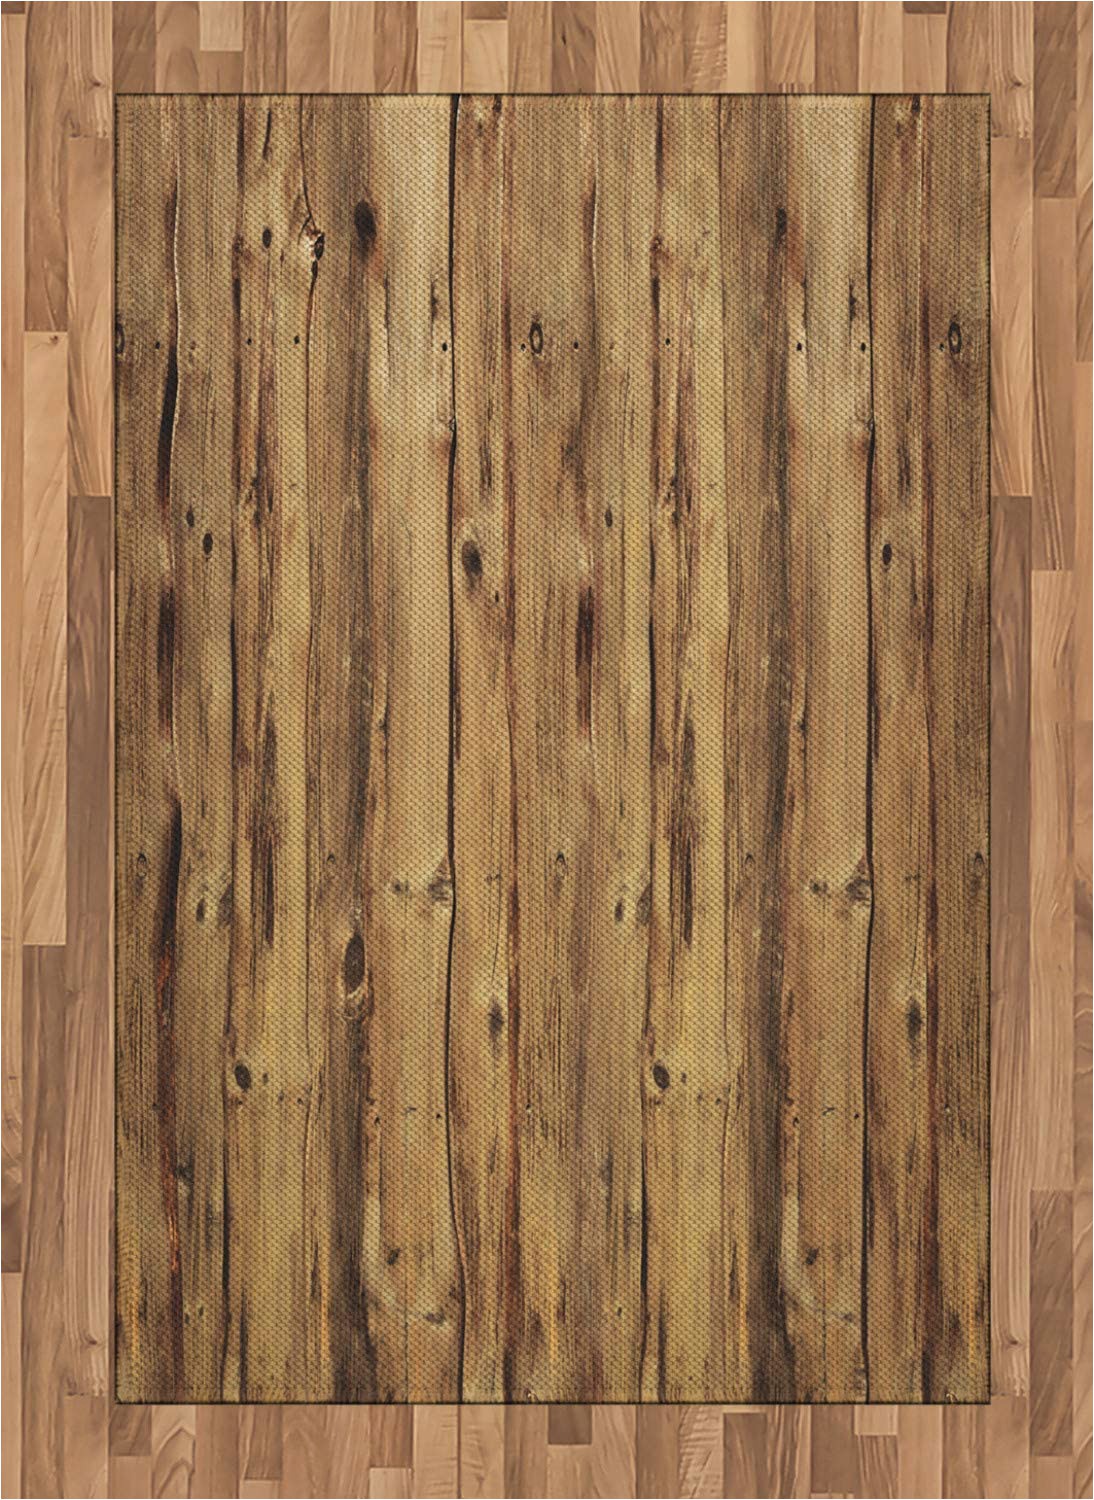 Rustic Dining Room area Rugs Amazon Ambesonne Rustic area Rug Wooden Texture Image